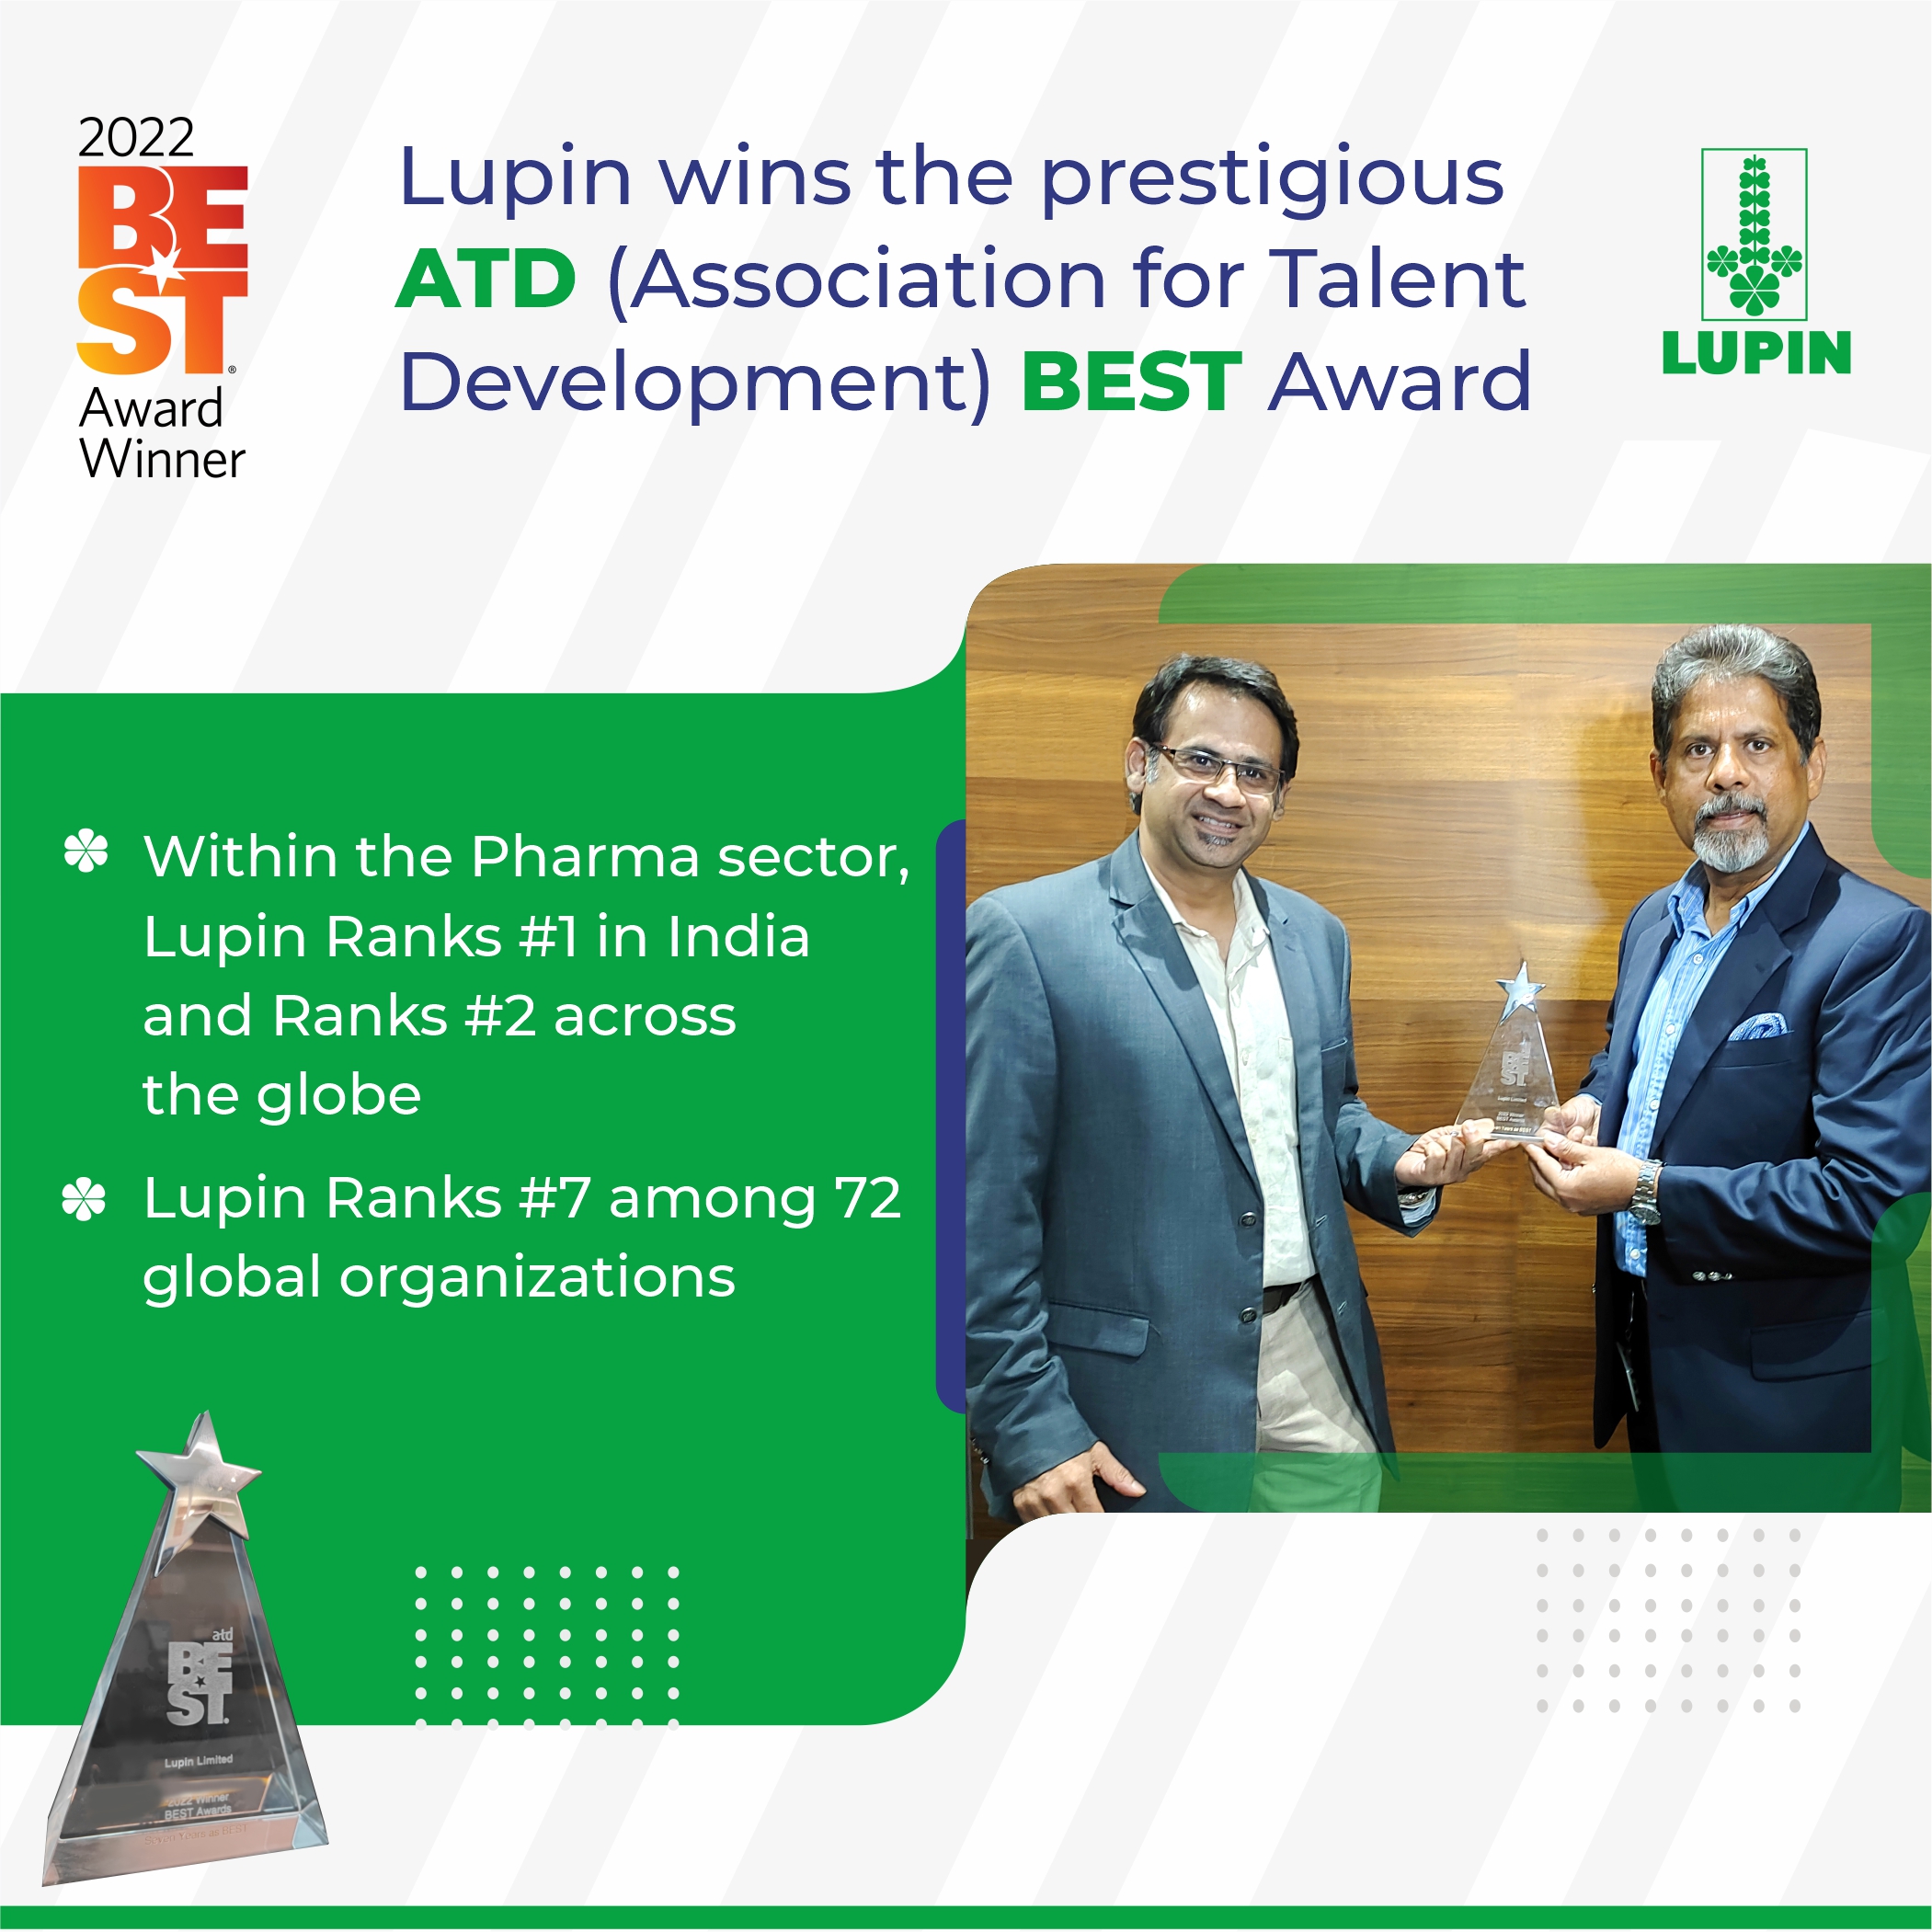 Lupin Wins the prestigious ATD (Association for Talent Development) BEST Awards. This award highlights Lupin’s commitment to investing in the growth and development of its people